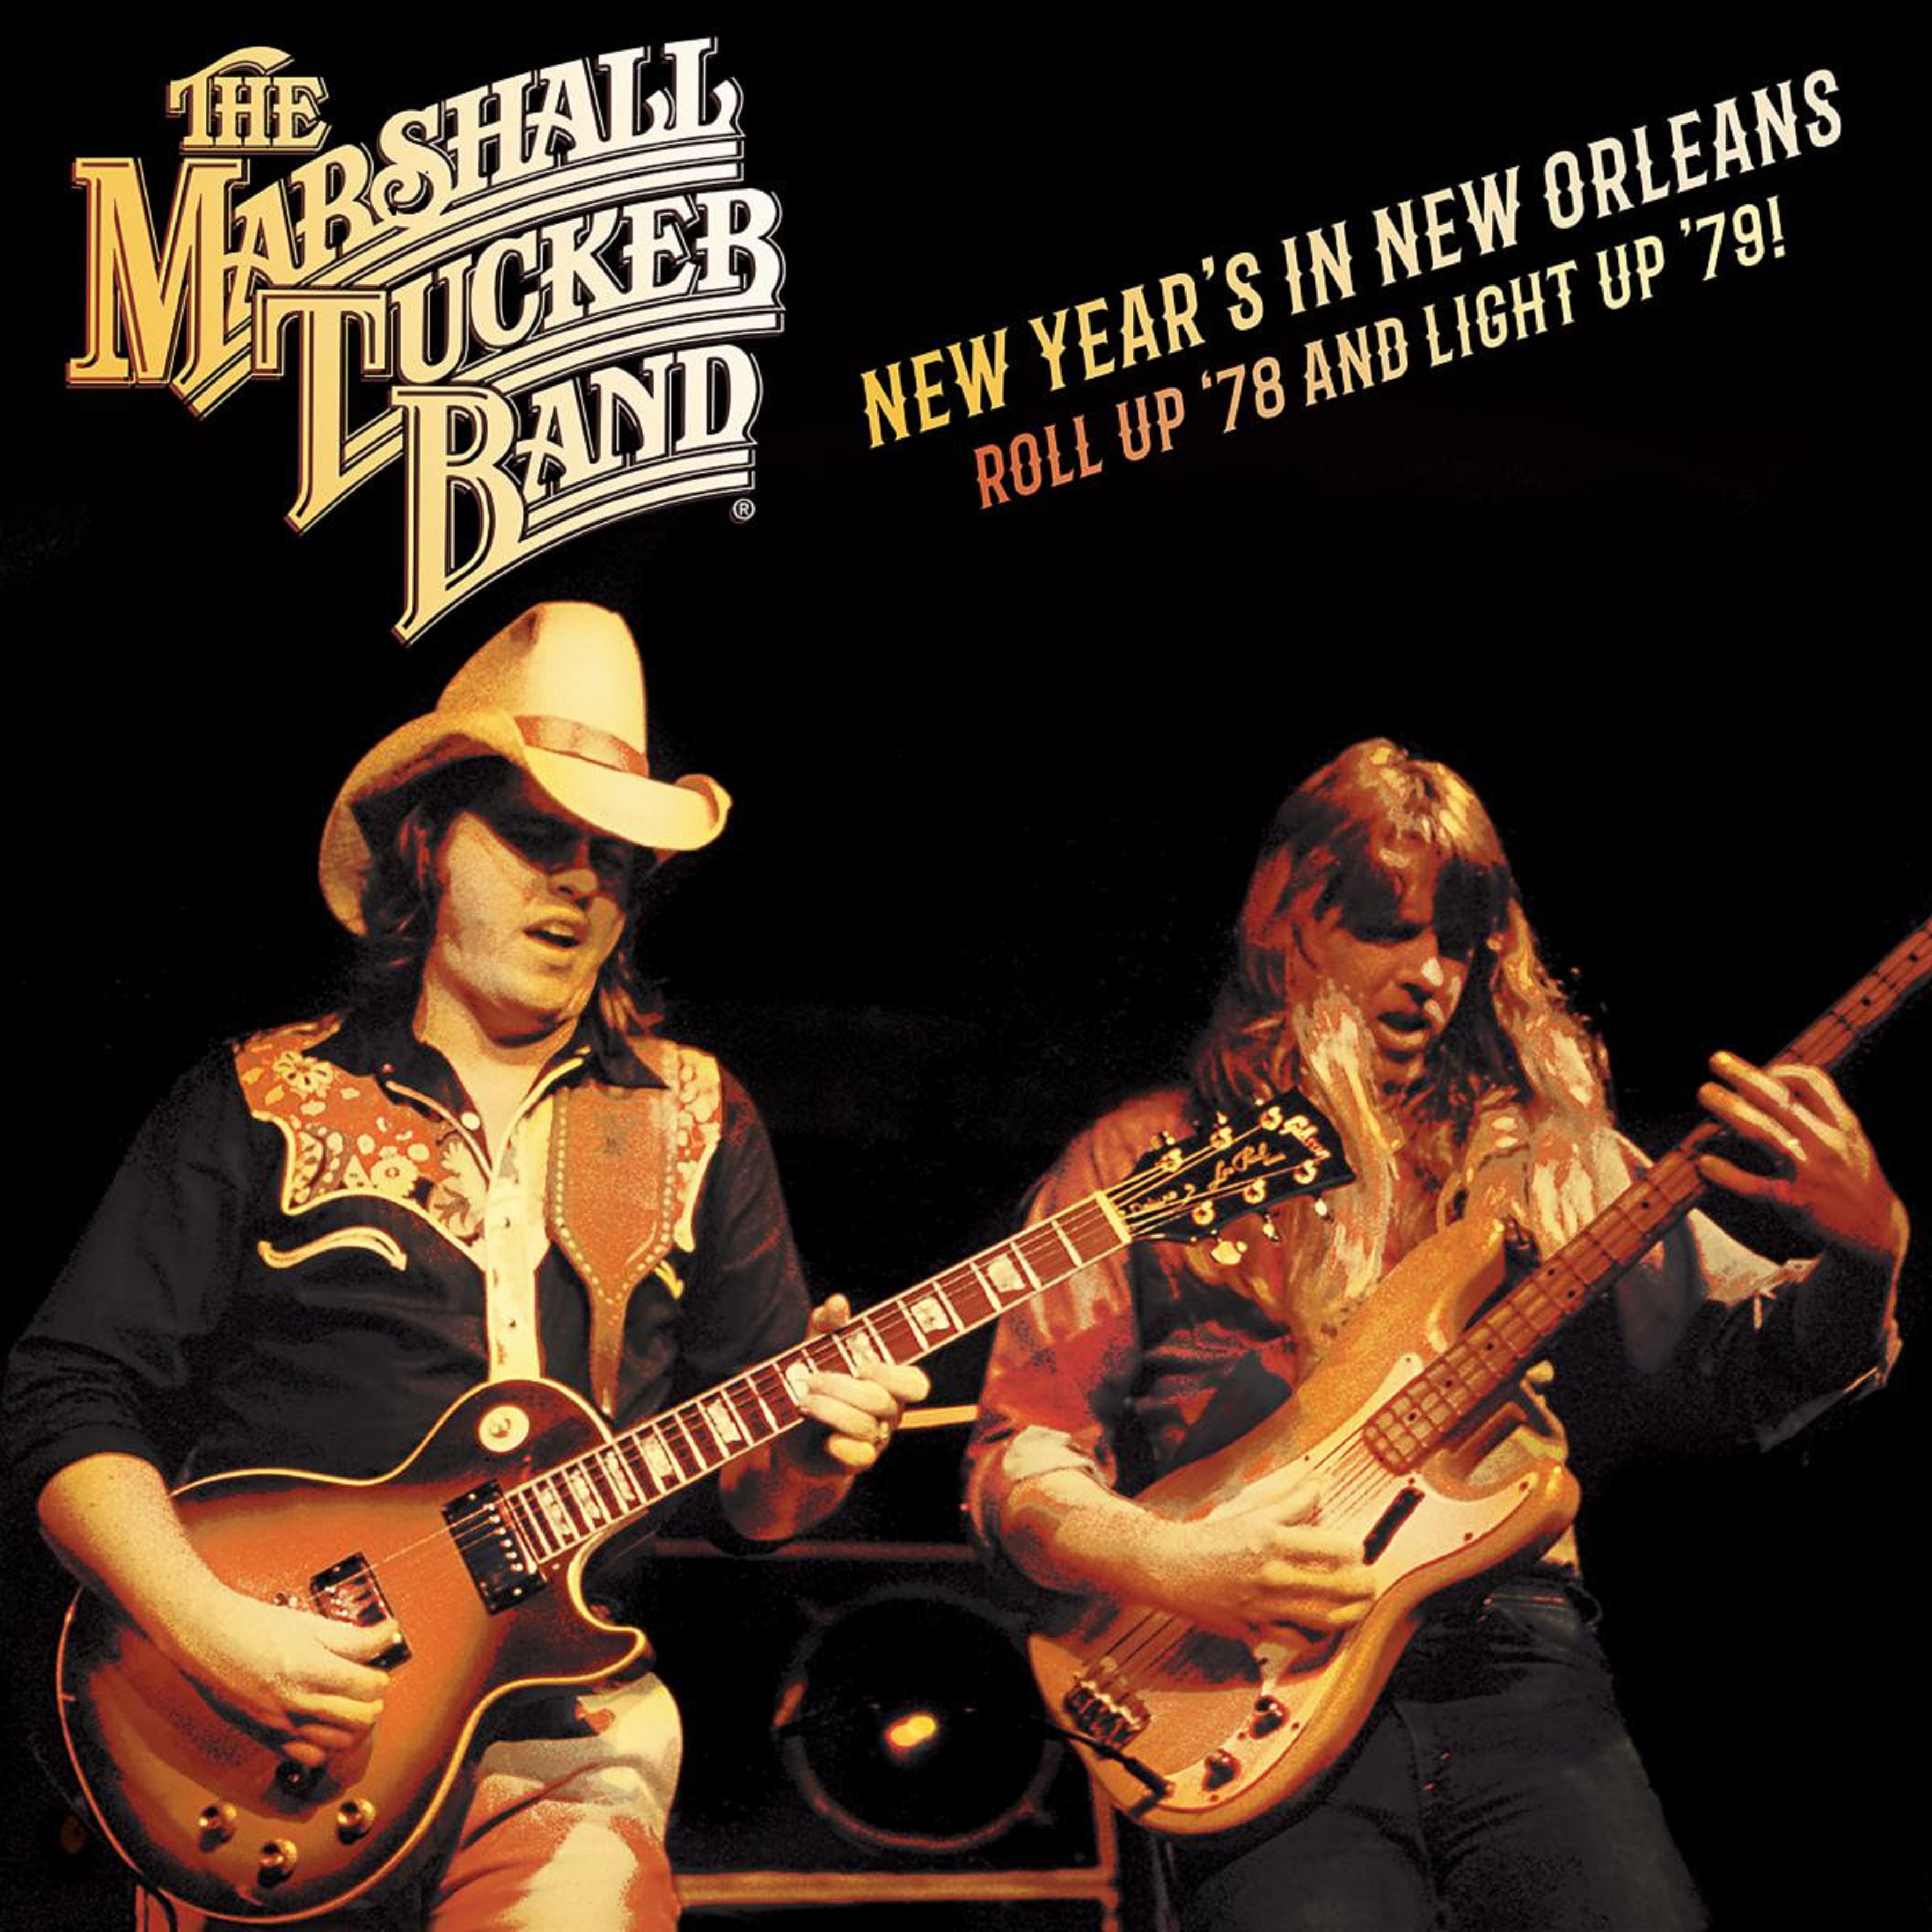 The Marshall Tucker Band 'New Year's In New Orleans Roll Up '78 And